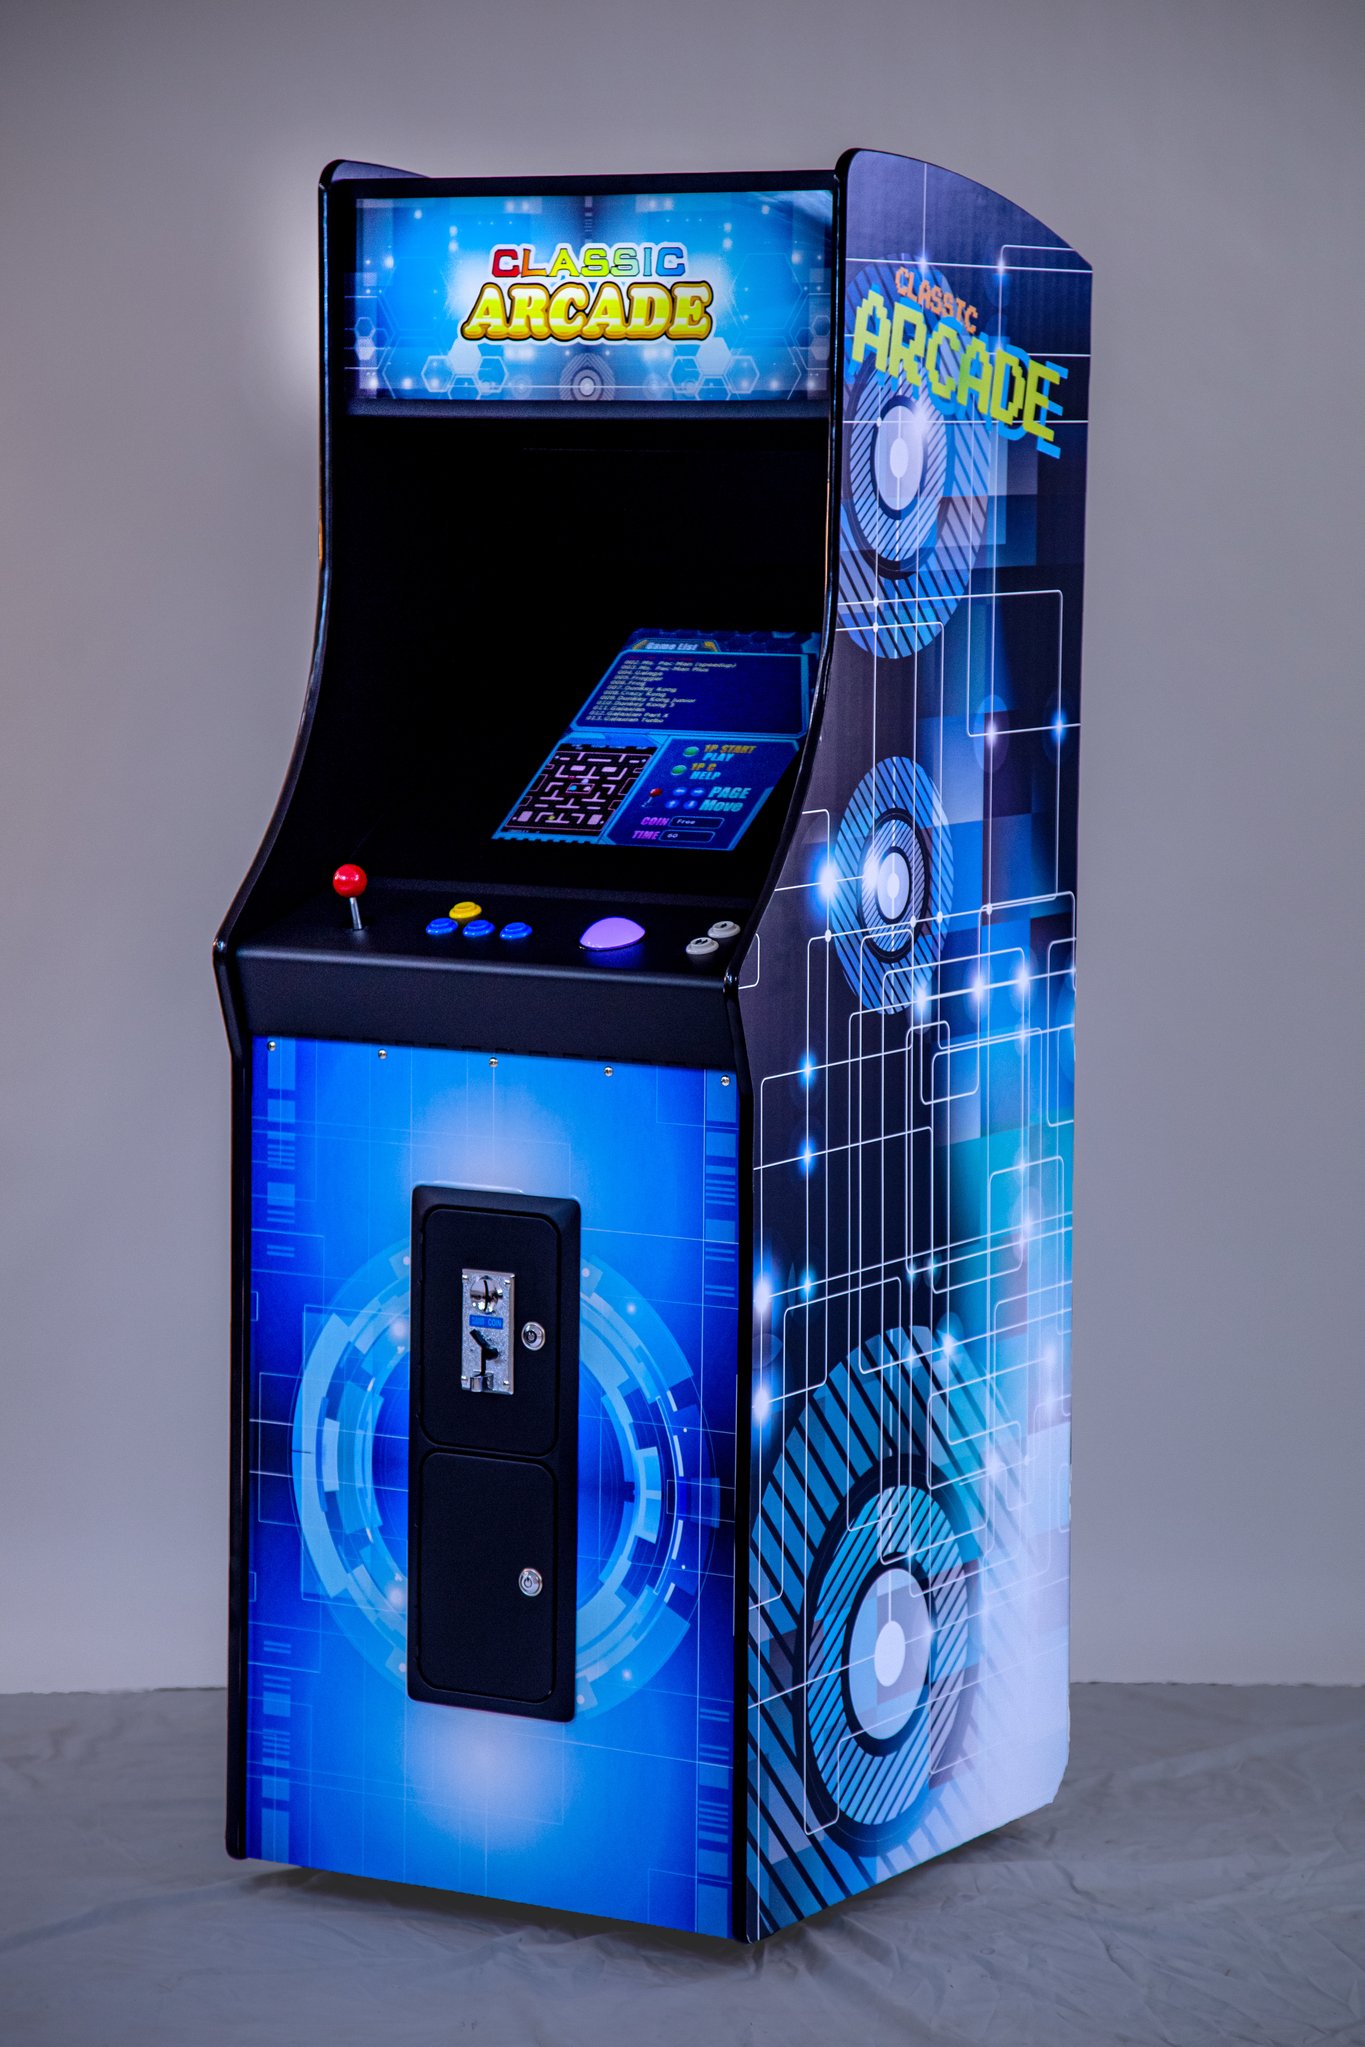 FULL-SIZED UPRIGHT ARCADE GAME FEAT. 60 CLASSIC GAMES WITH LED